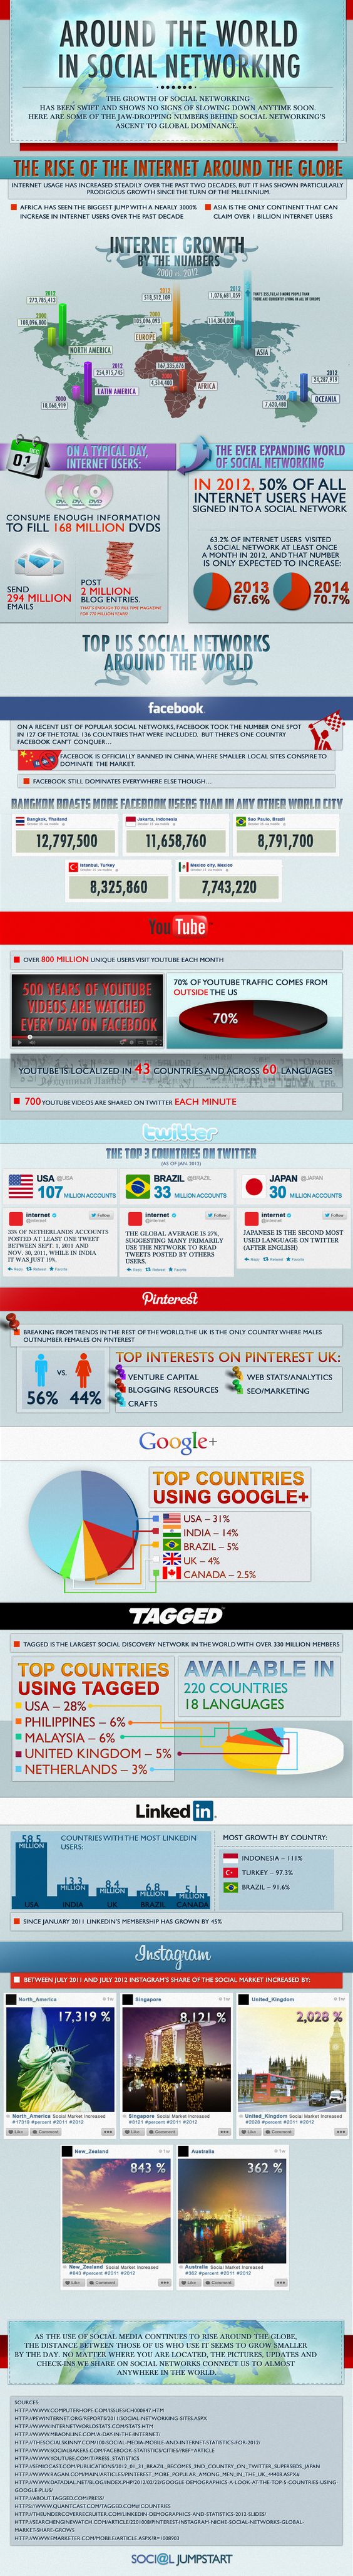 How People Around the World Use Social Media